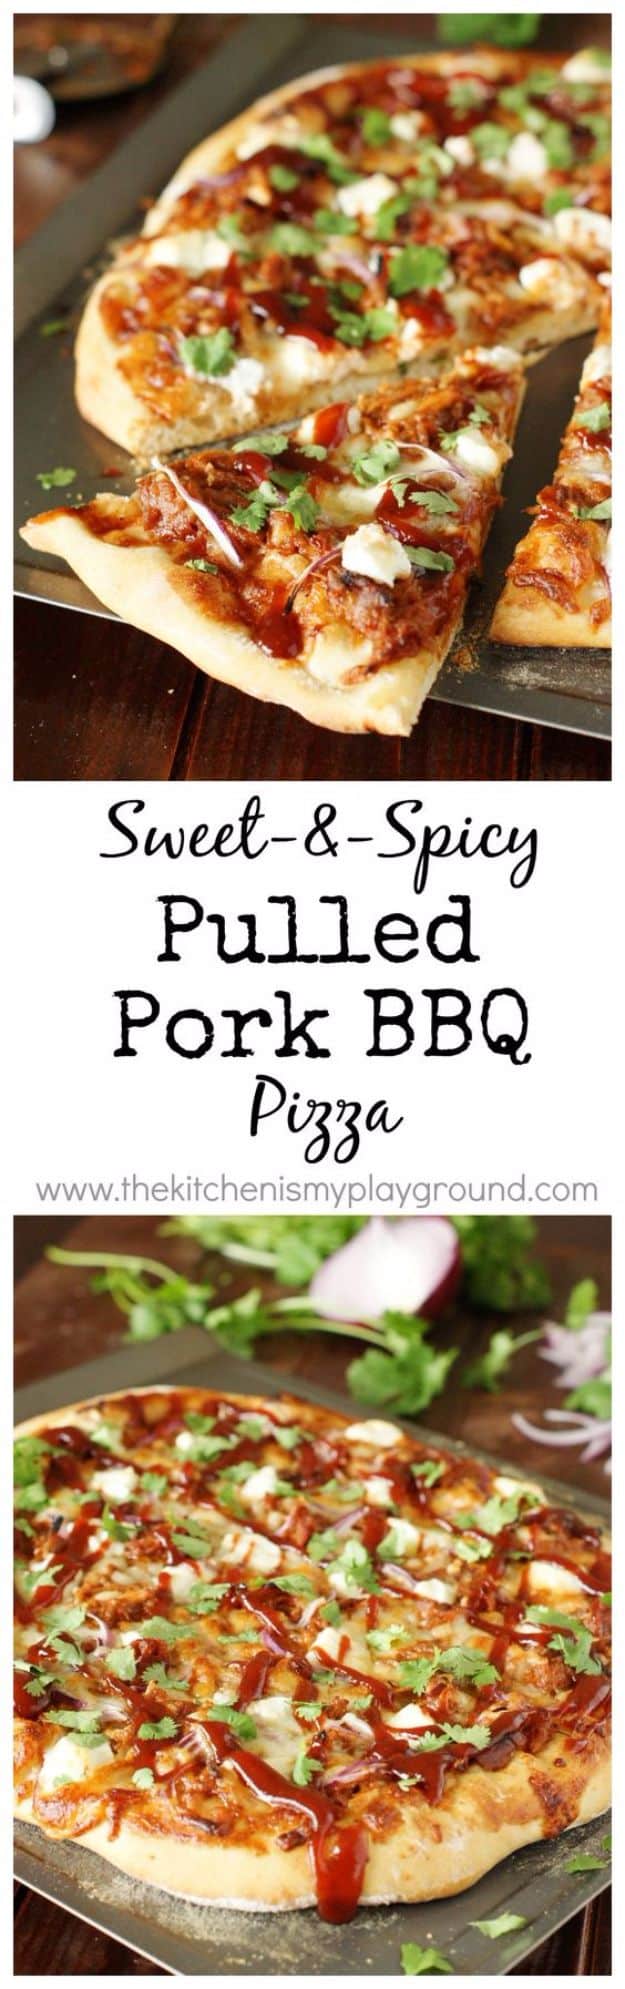 Best Pizza Recipes - Sweet & Spicy Pulled Pork BBQ Pizza - Homemade Pizza Recipe Ideas for Healthy, Easy Dinner, Lunch and Snacks - How To Make Pizza Dough at Home - Step by Step Tutorials for Varieties with Pepperoni, Gourmet and Unique Tips With Pillsbury Biscuits, for Kids, With Chicken and French Bread - Thin Crust and Deep Dish Pizzas #pizza #recipes